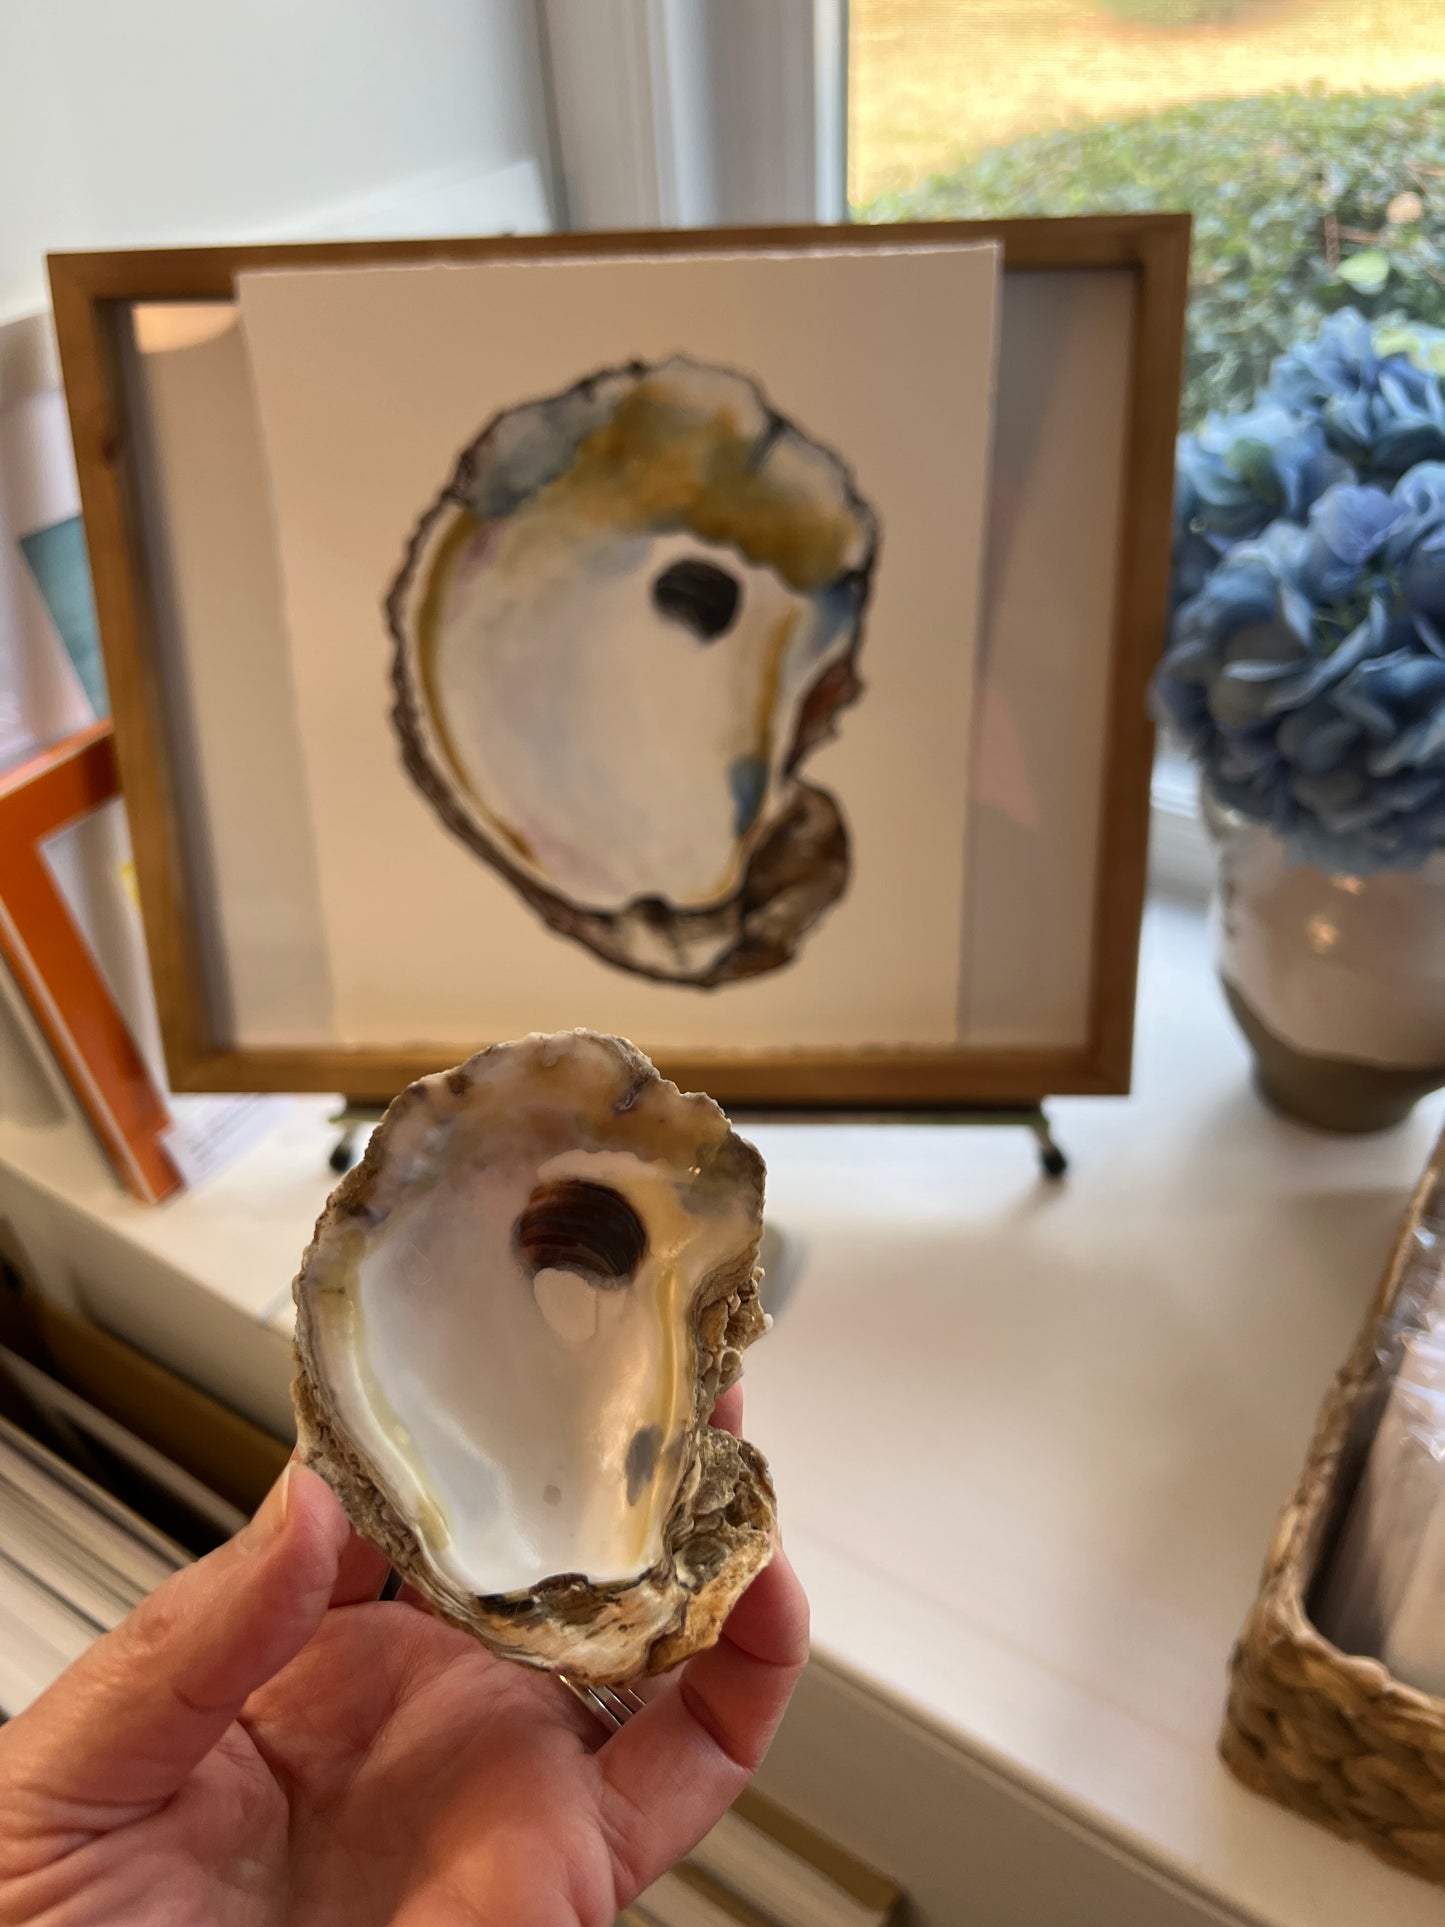 Original Watercolor "Oyster Shell"  14 X 16